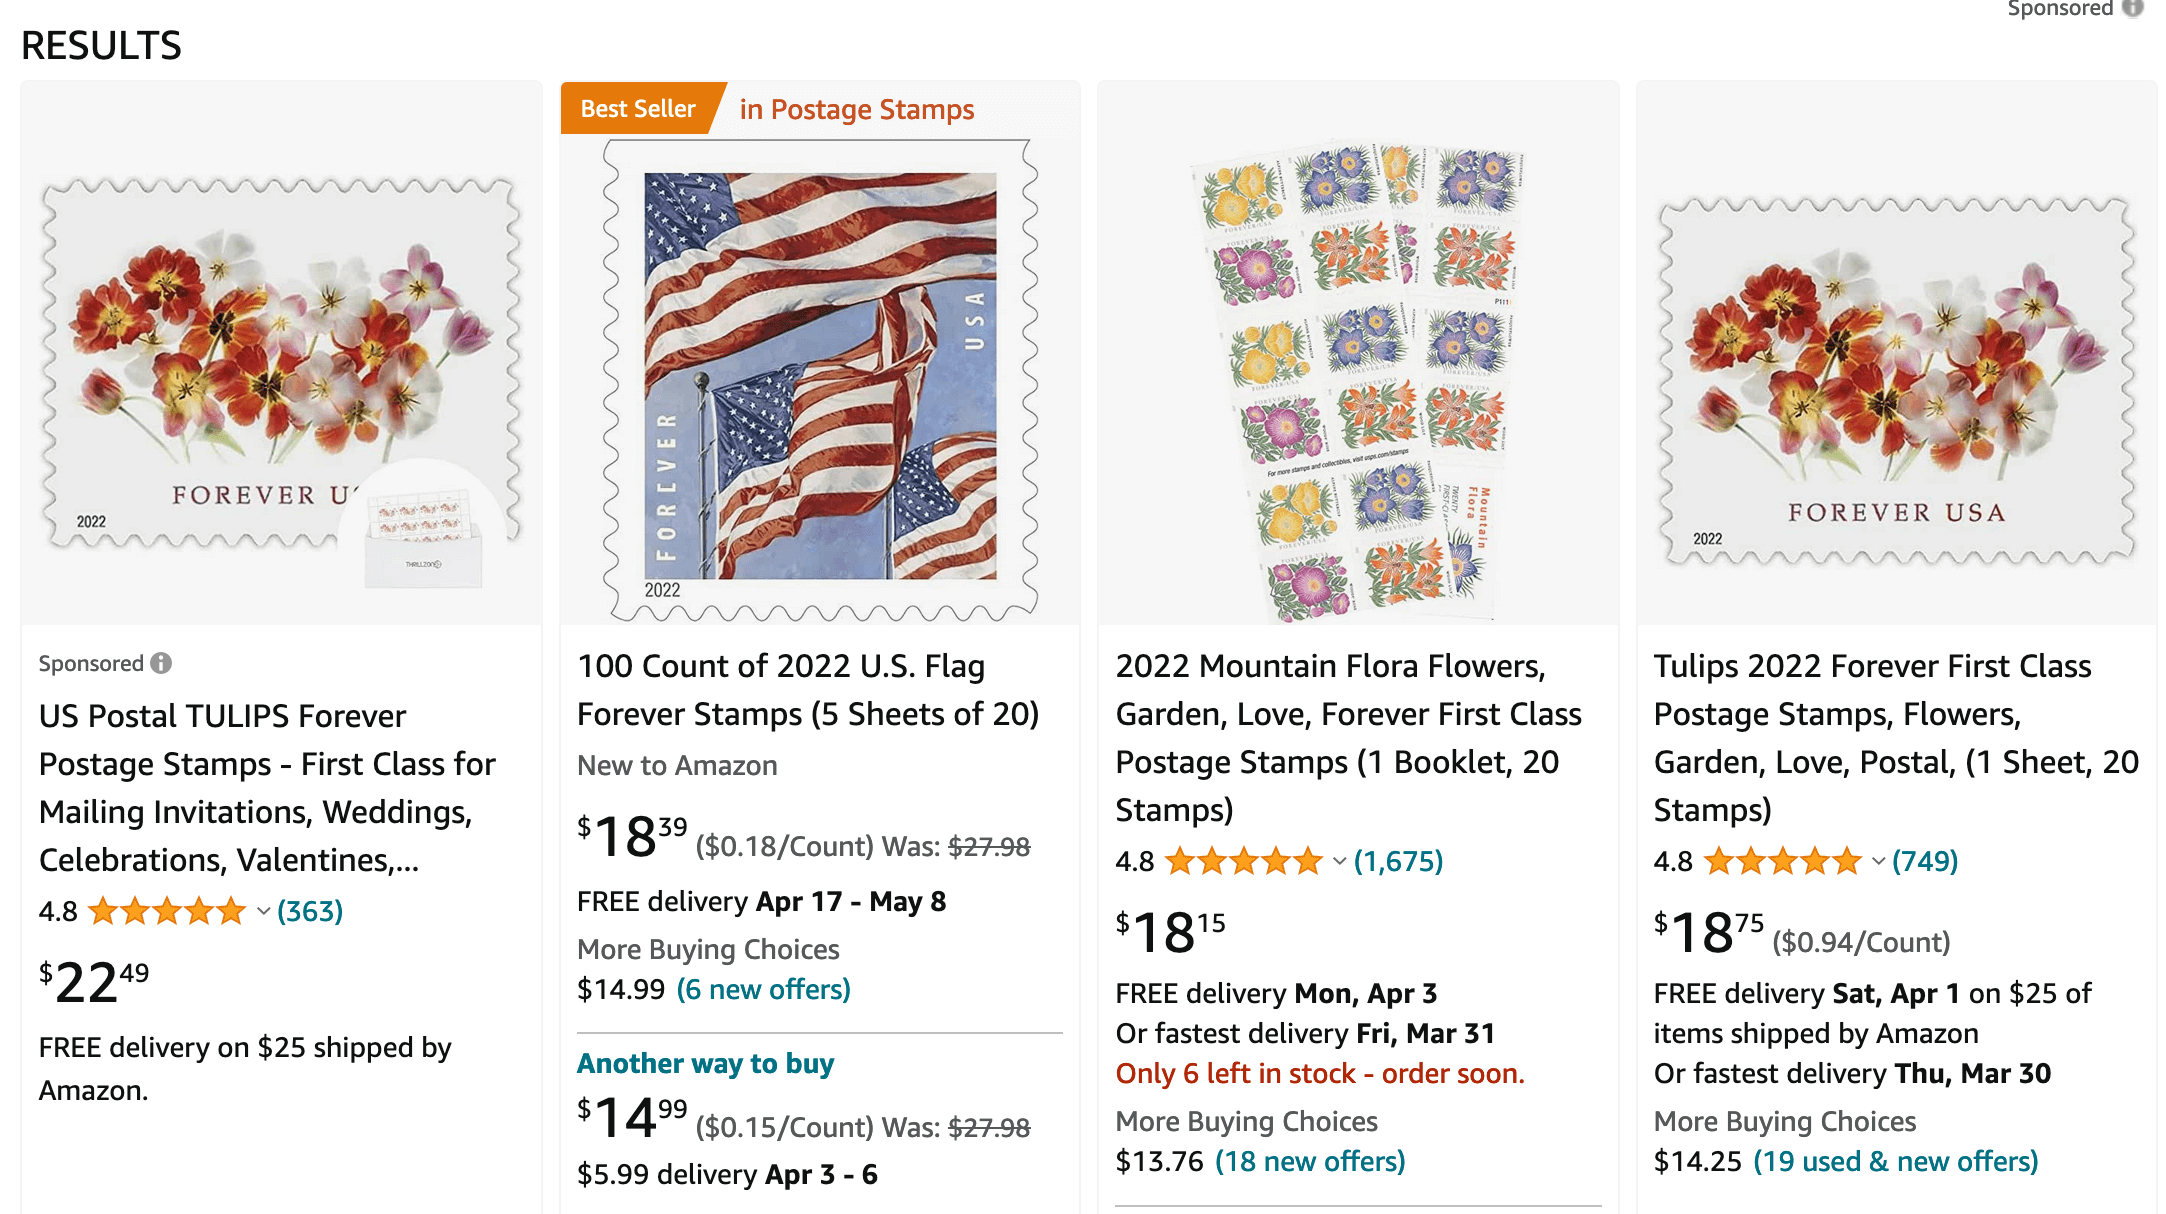 screenshot of postage stamps being sold on amazon.com